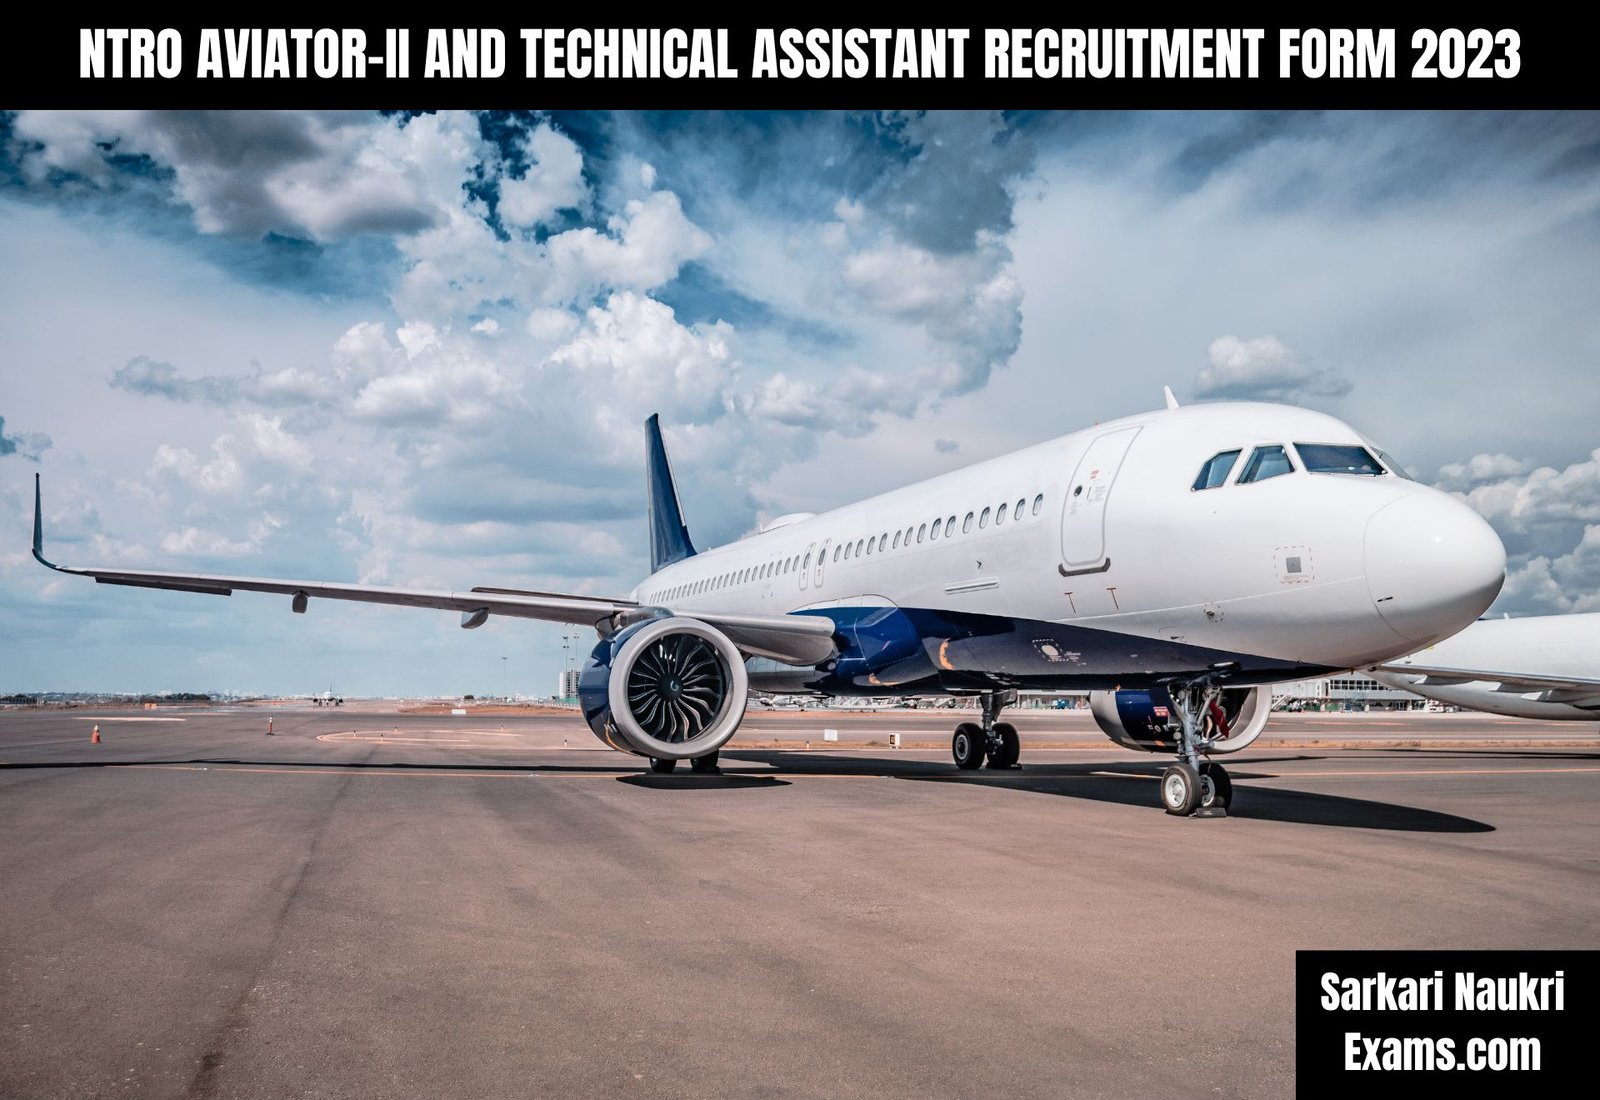 NTRO Aviator-II and Technical Assistant Recruitment Form 2023